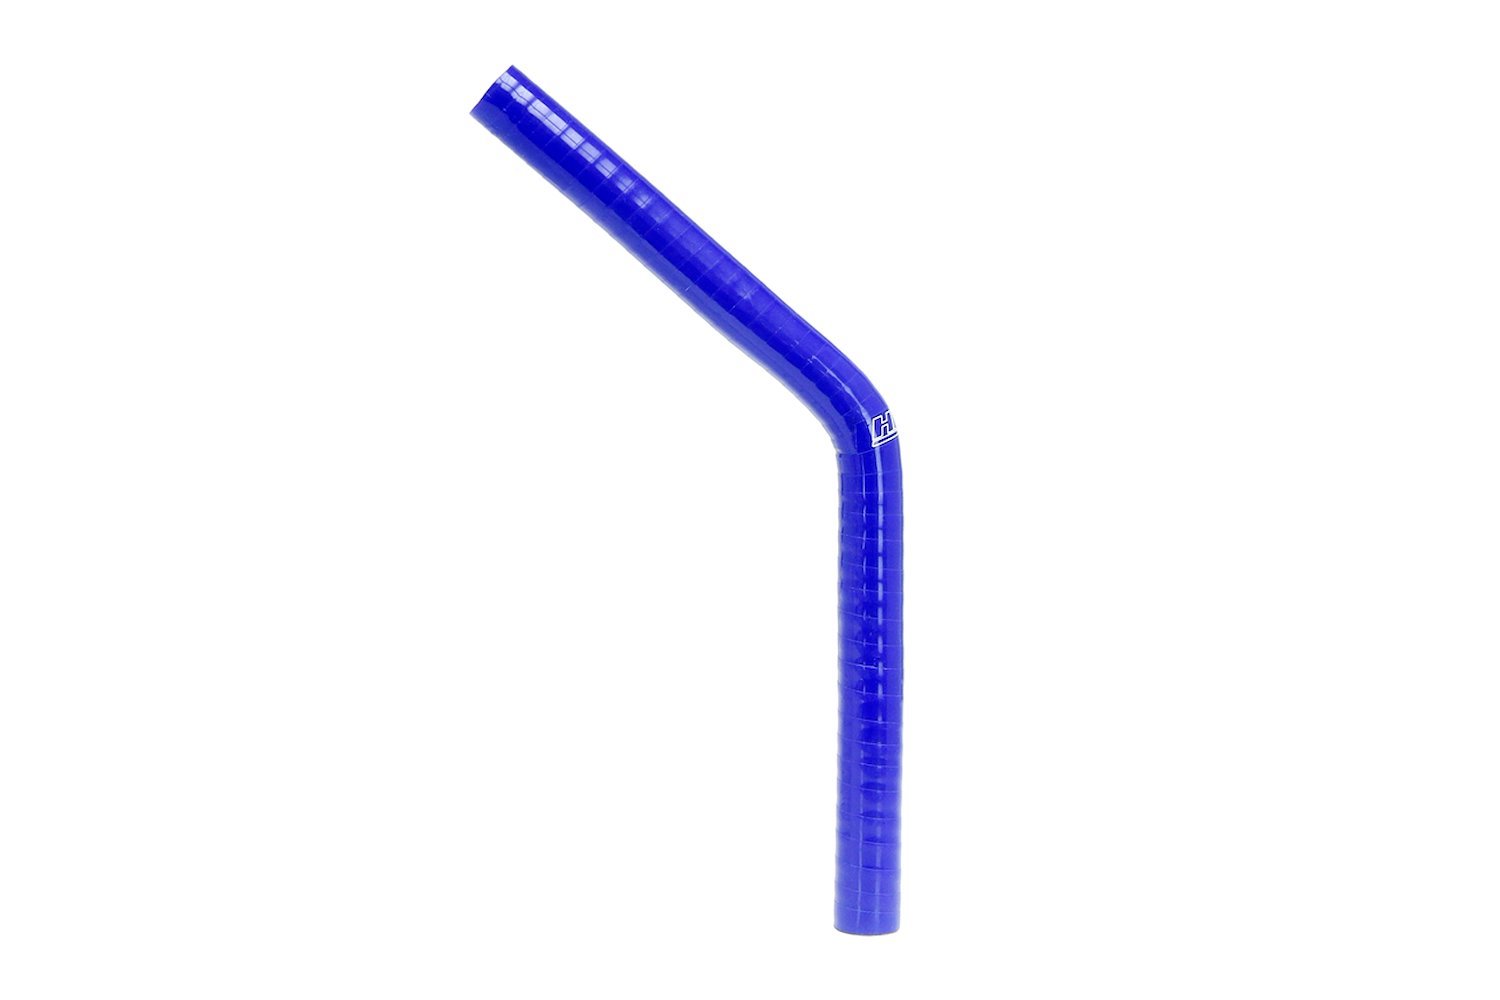 HTSEC45-138-BLUE Silicone 45-Degree Elbow Coupler Hose, High-Temp 4-Ply Reinforced, 1-3/8 in. ID, Blue